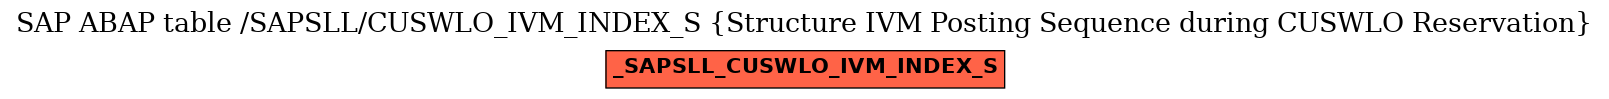 E-R Diagram for table /SAPSLL/CUSWLO_IVM_INDEX_S (Structure IVM Posting Sequence during CUSWLO Reservation)